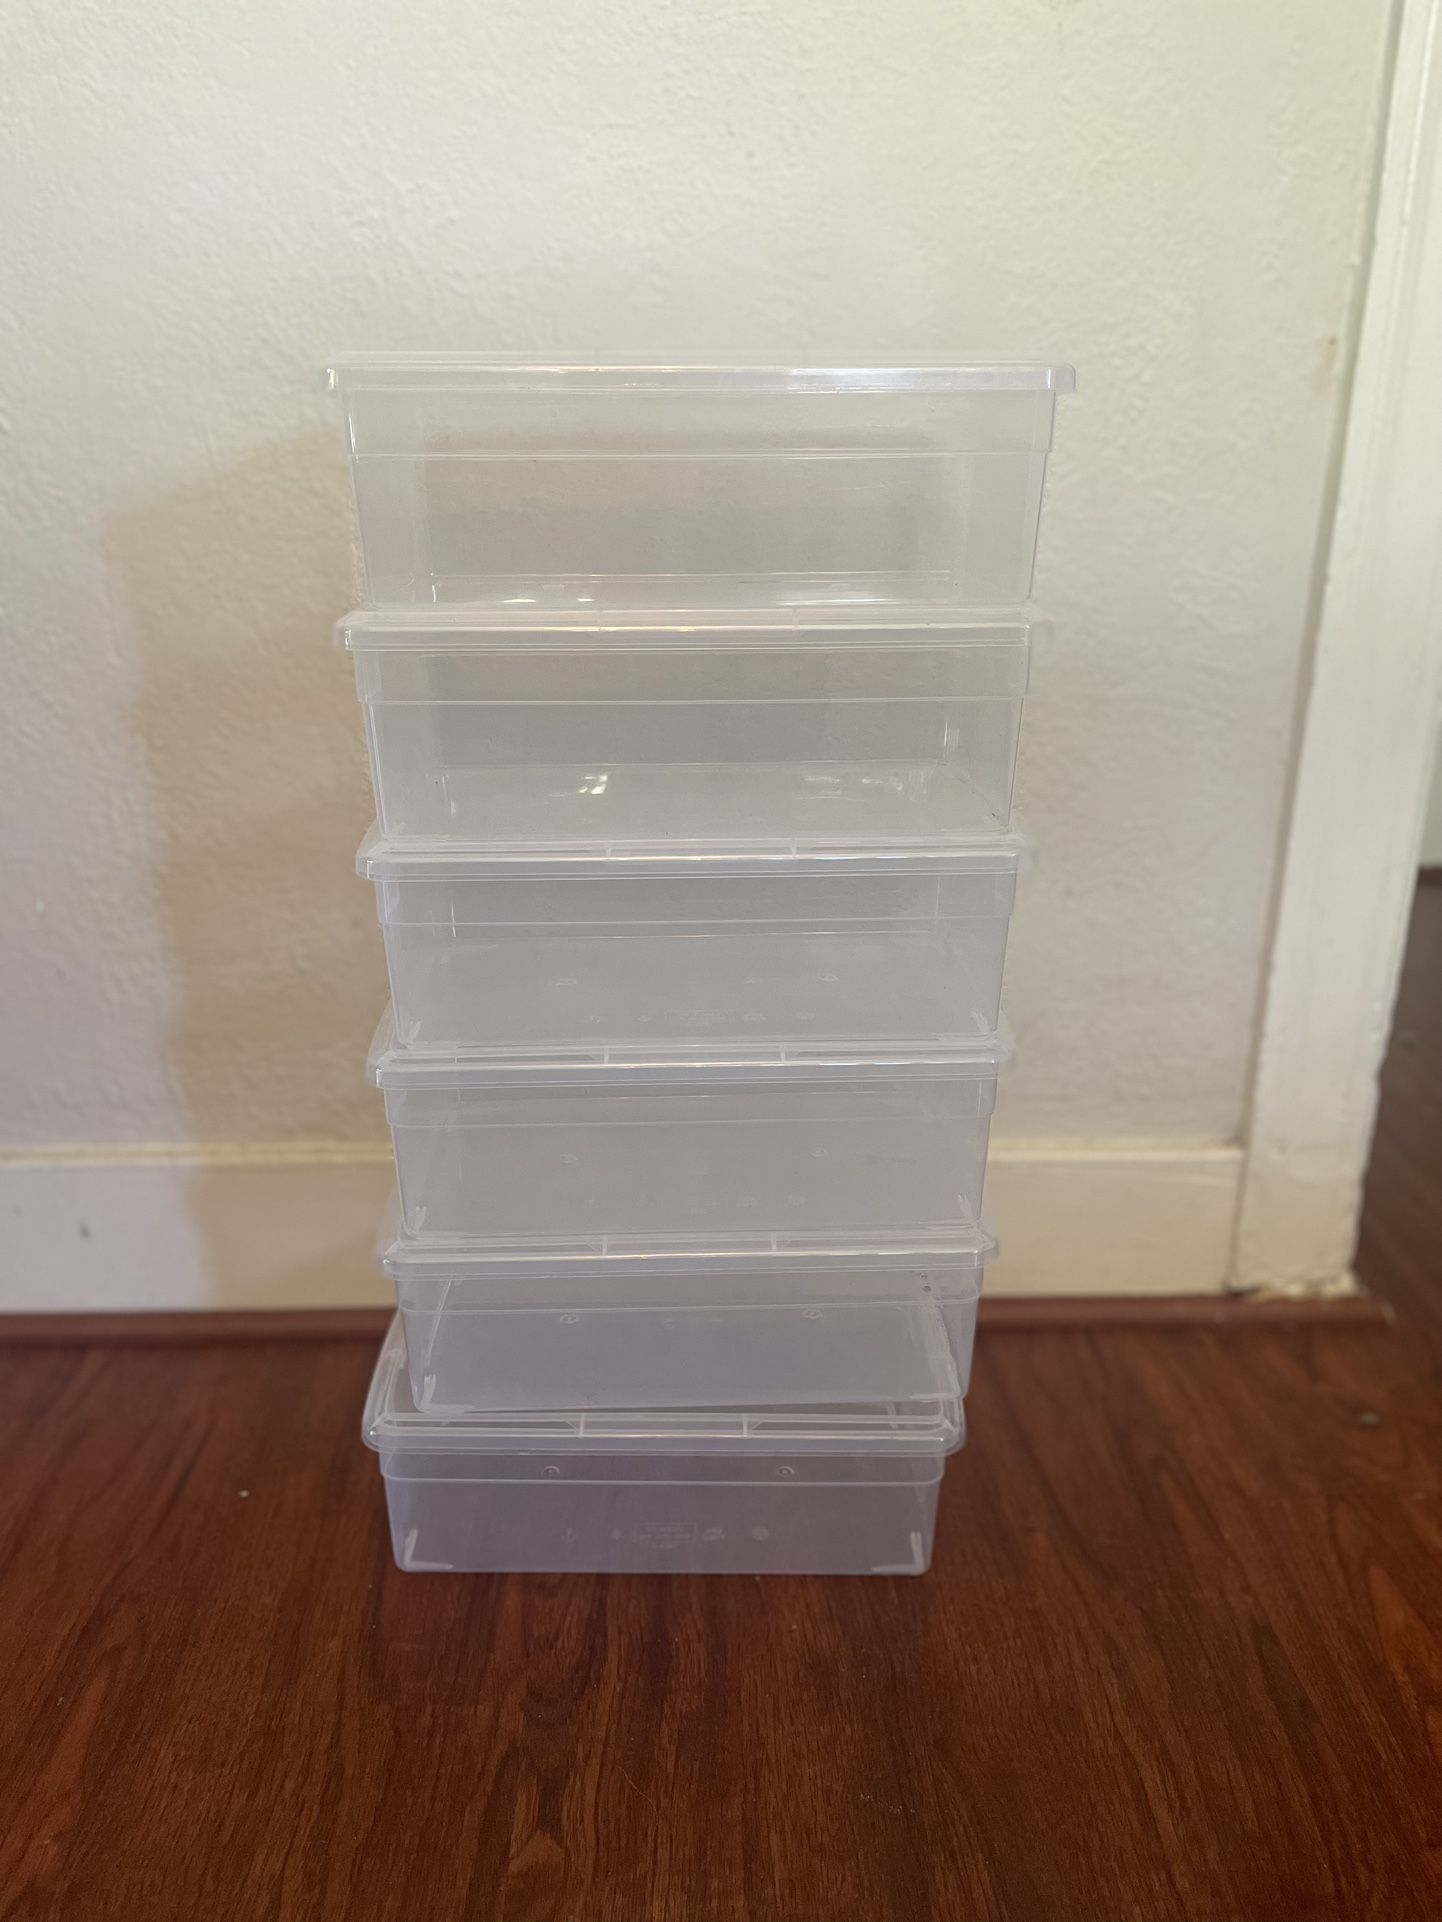 Clear plastic containers (6) 